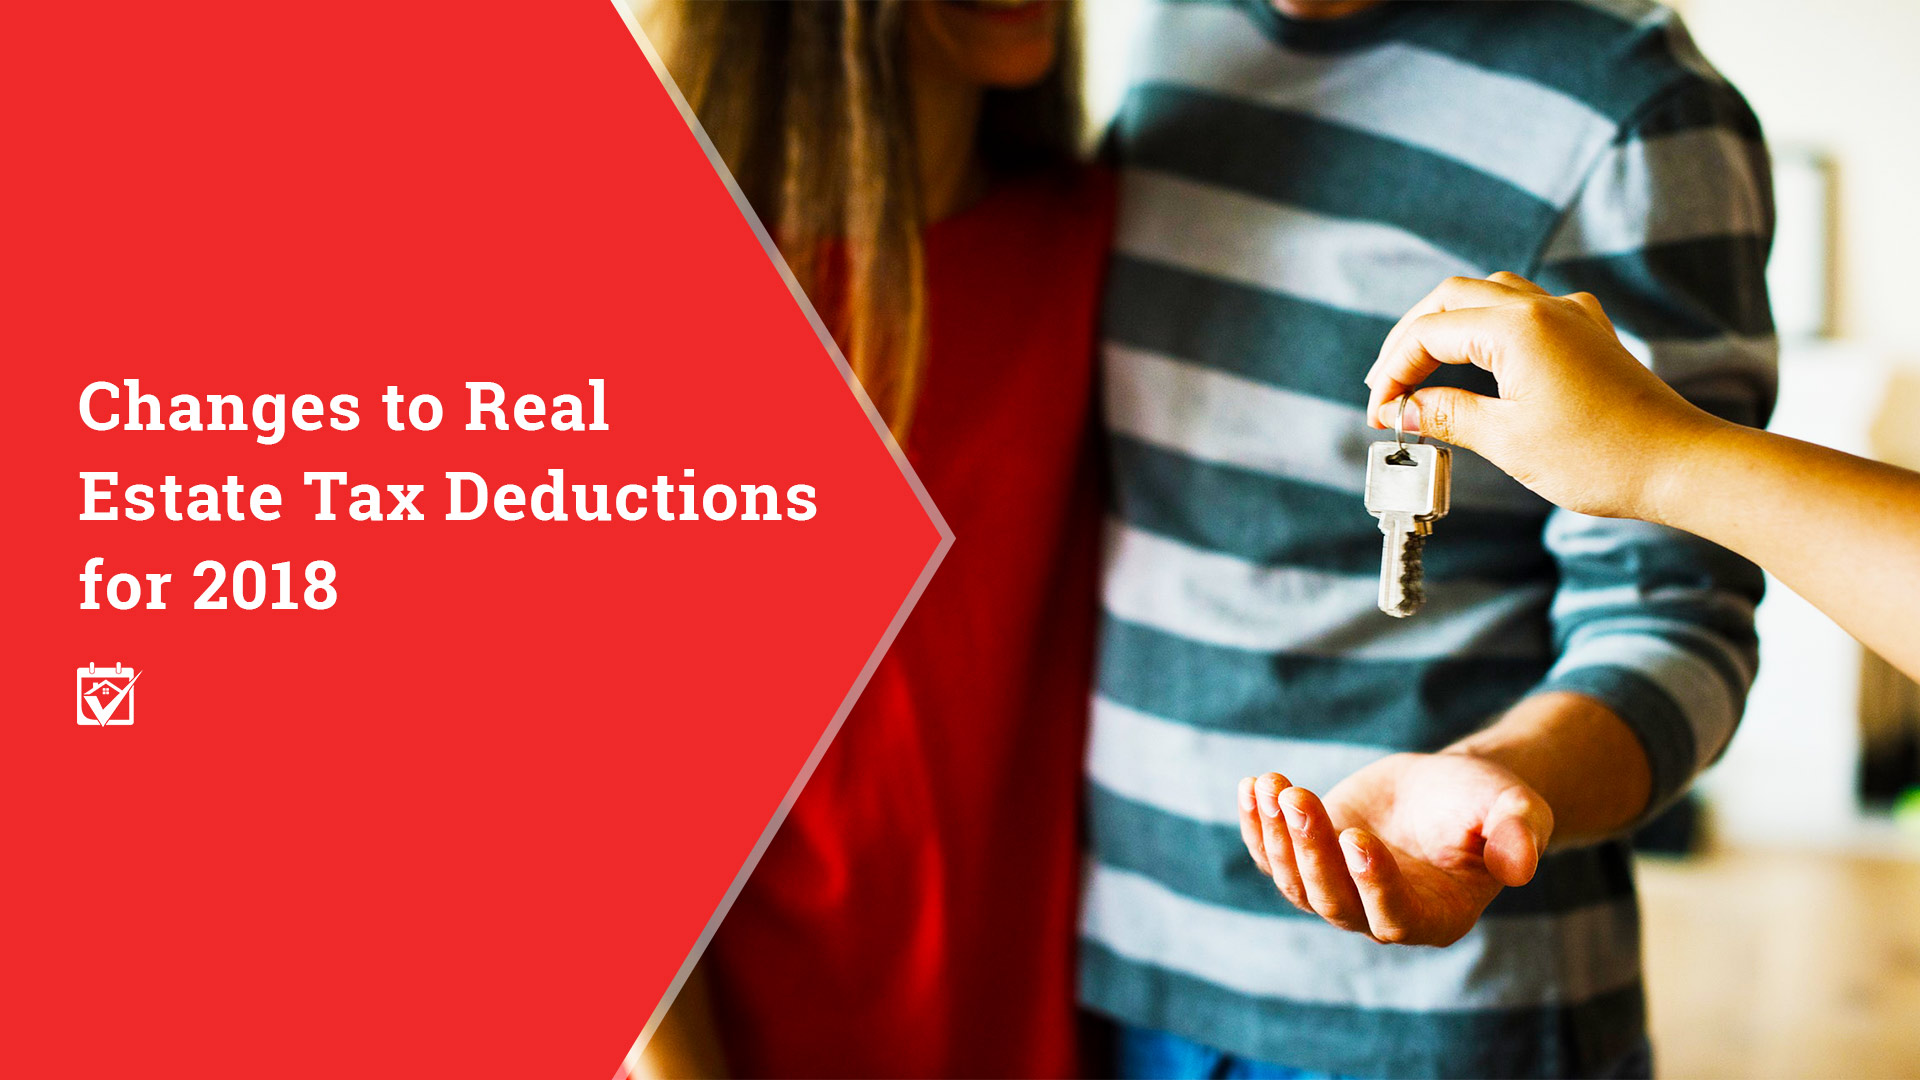 Changes to Real Estate Tax Deductions for 2018